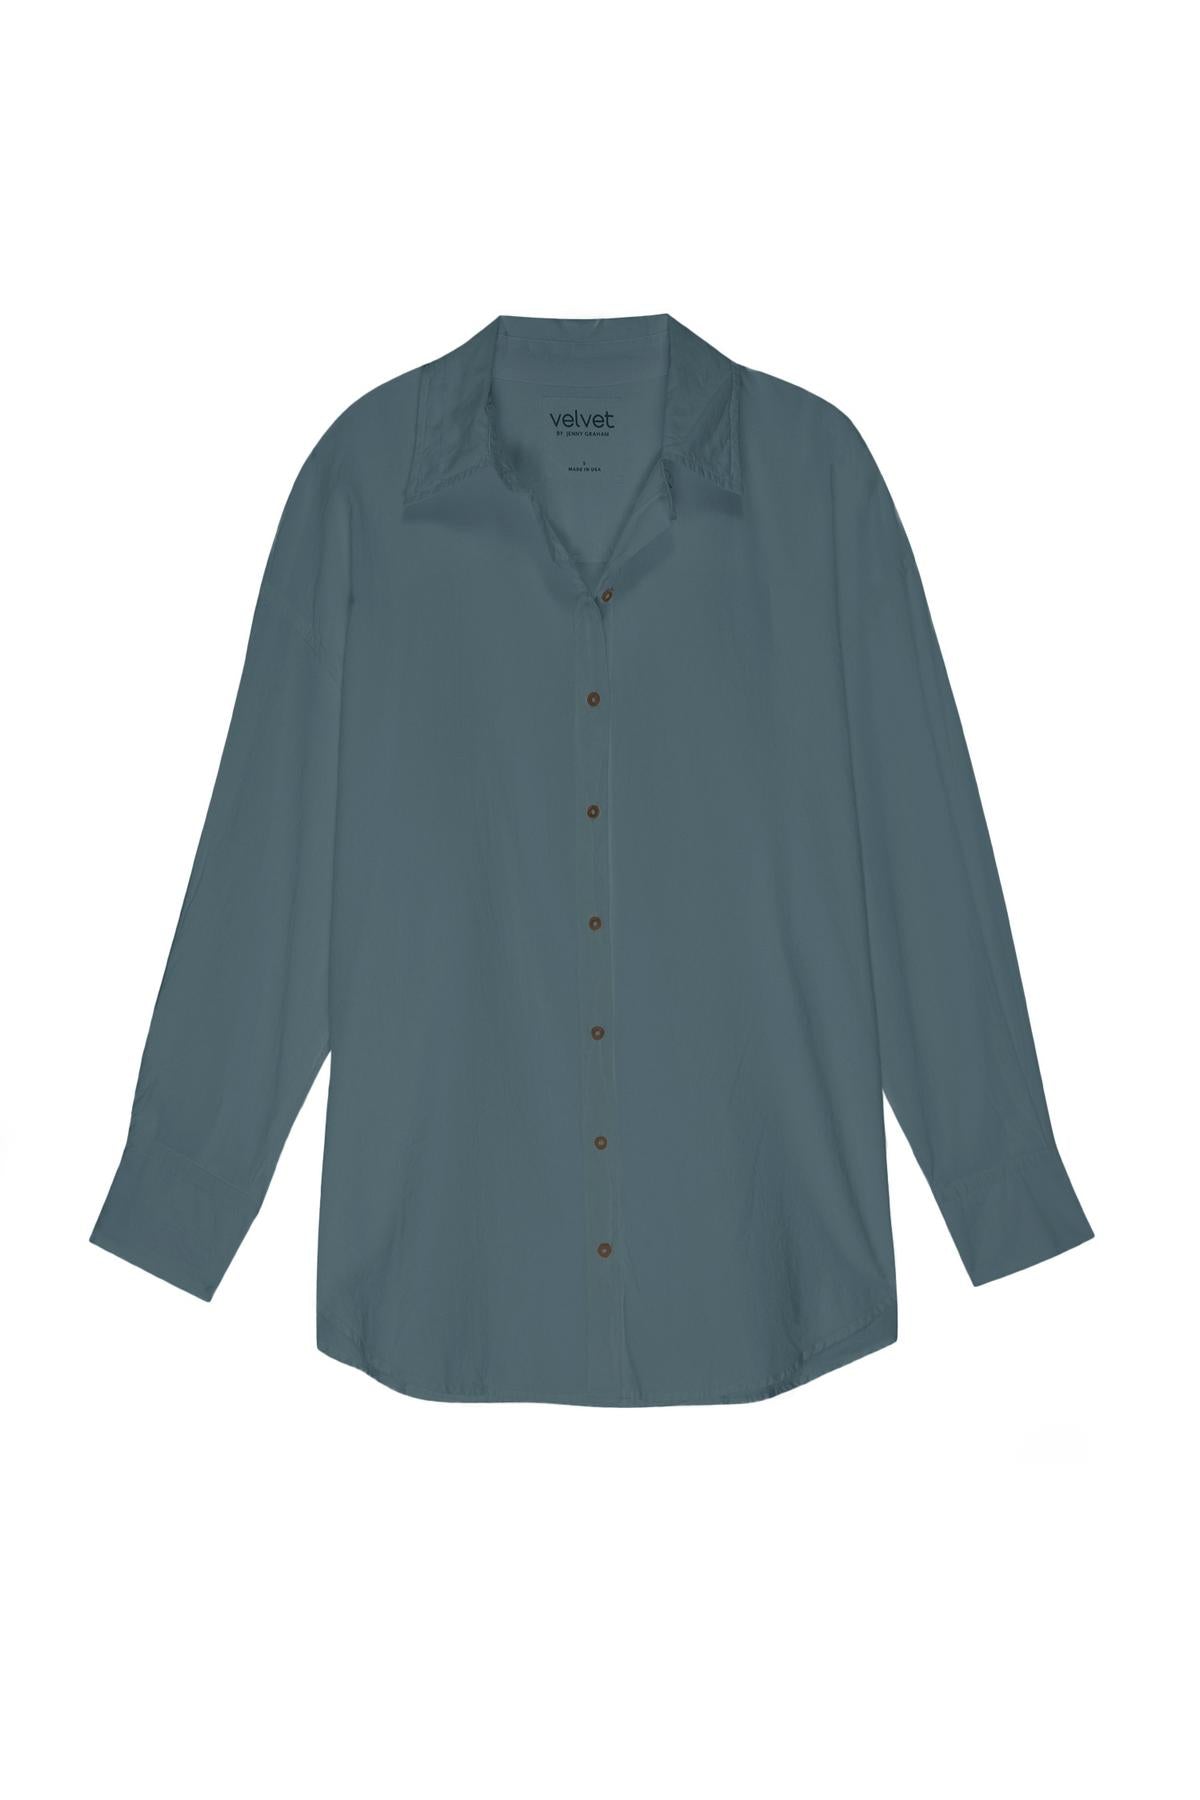 A women's Velvet by Jenny Graham REDONDO BUTTON-UP SHIRT with a drop shoulder seam and buttons down the front.-35783066026177